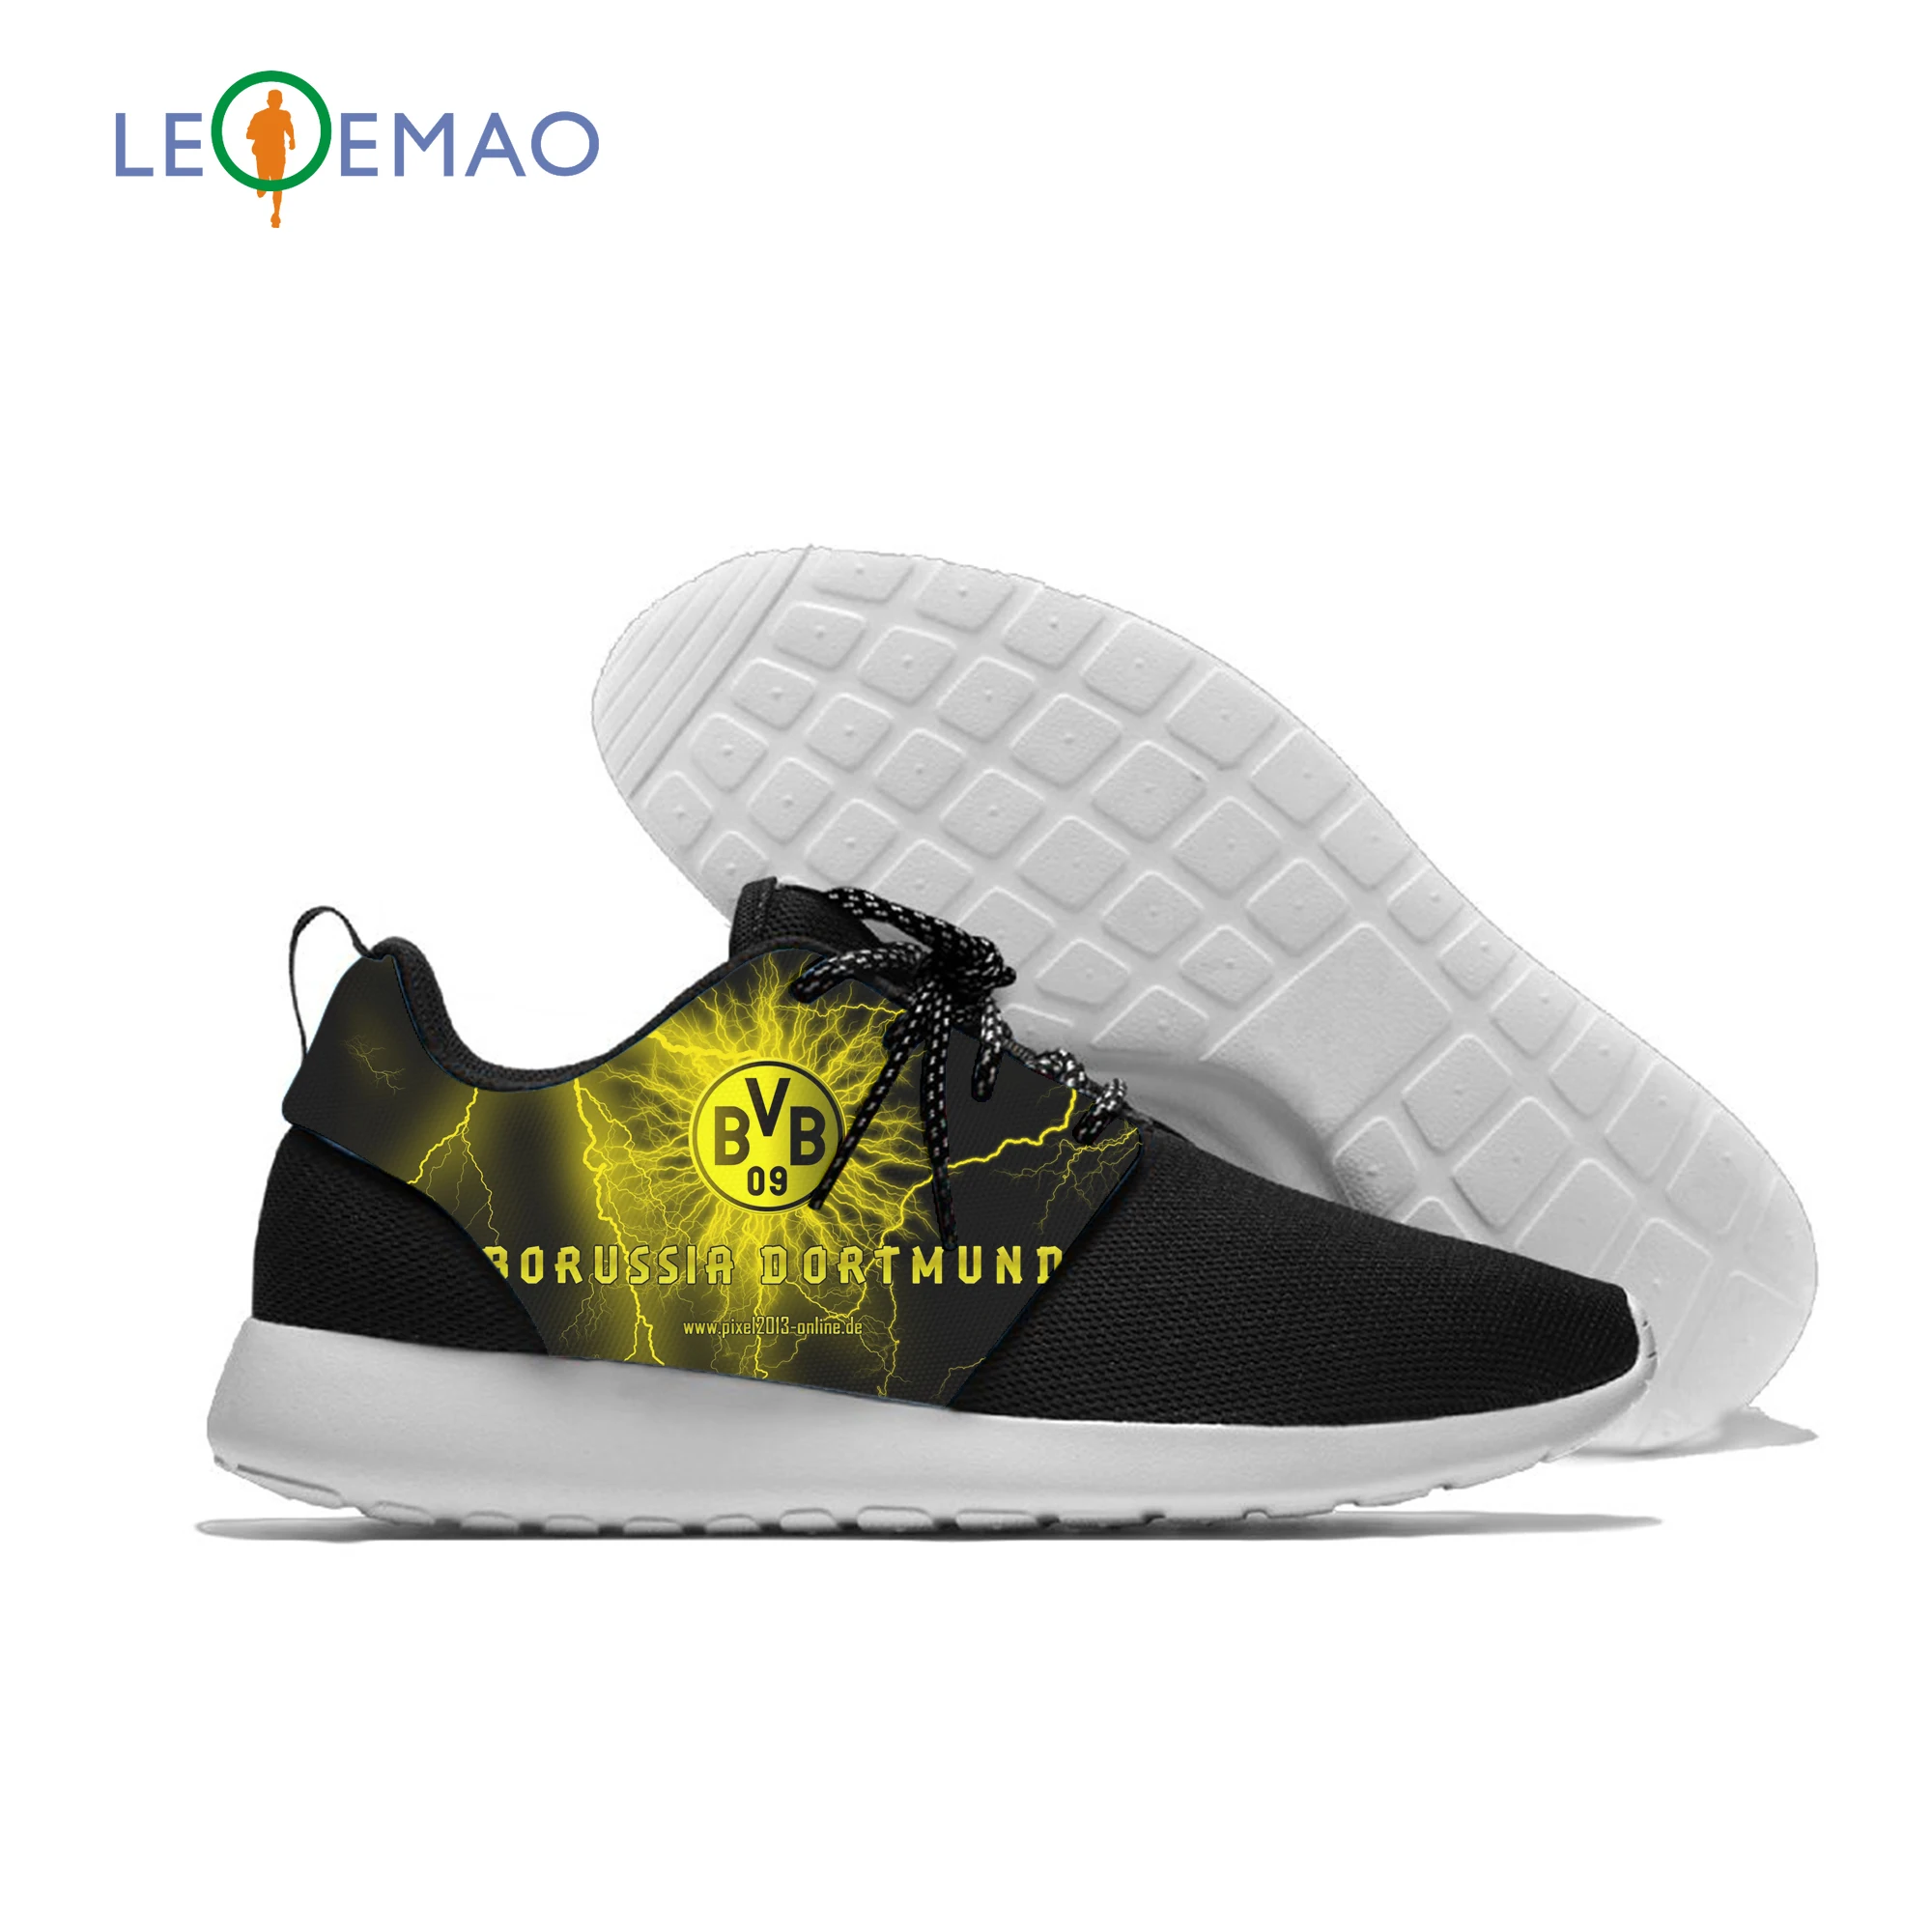 

Customized Men Shoes Dortmund Low Top Shoes Independent Design Sneakers Style Male Breathable Custom Borussia Fans Shoes